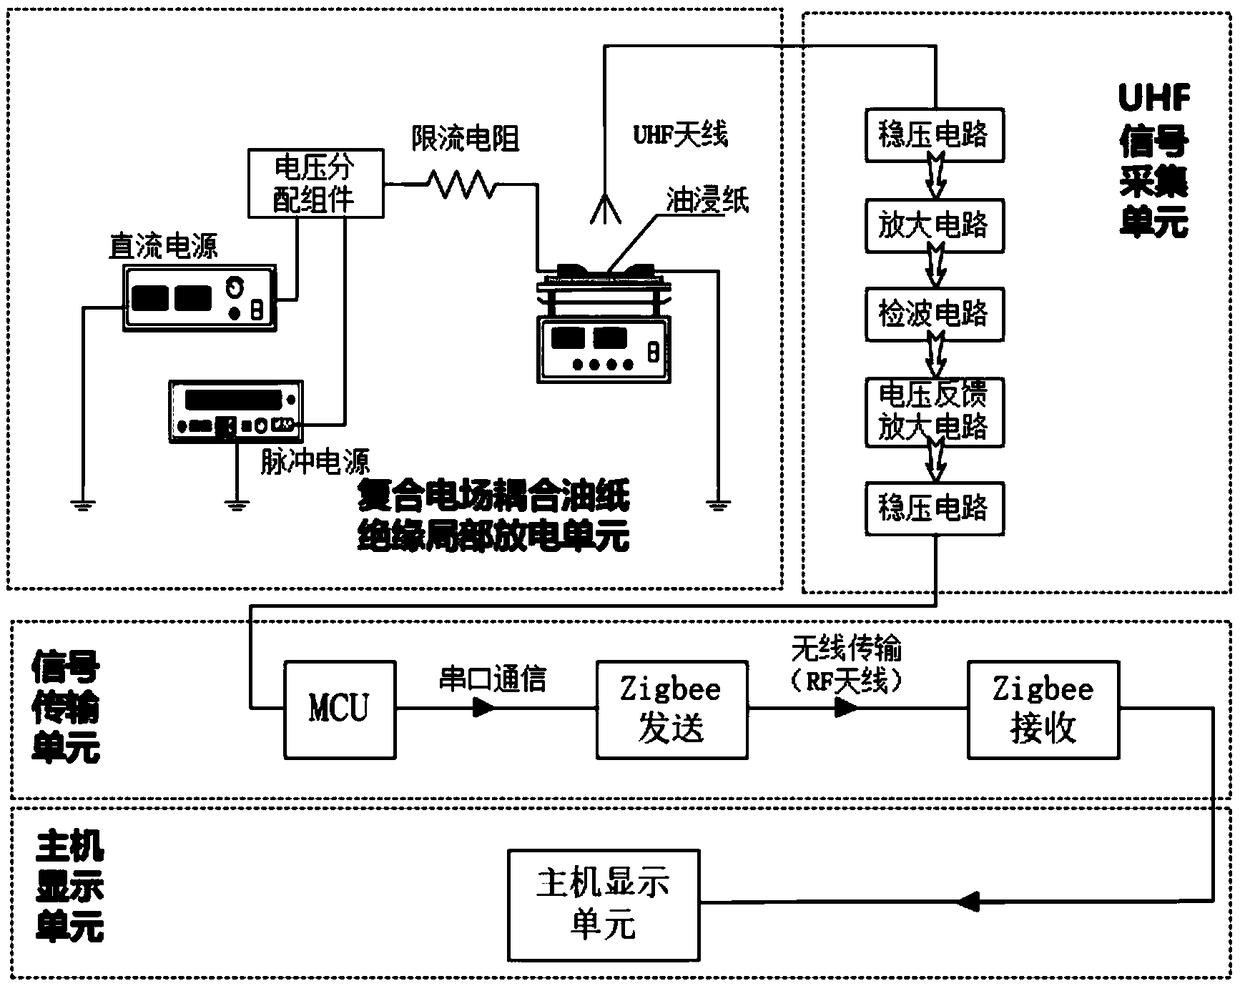 Ultra-high-frequency-method-based coupling oil-paper-insulation partial discharge detection system in composite electric field